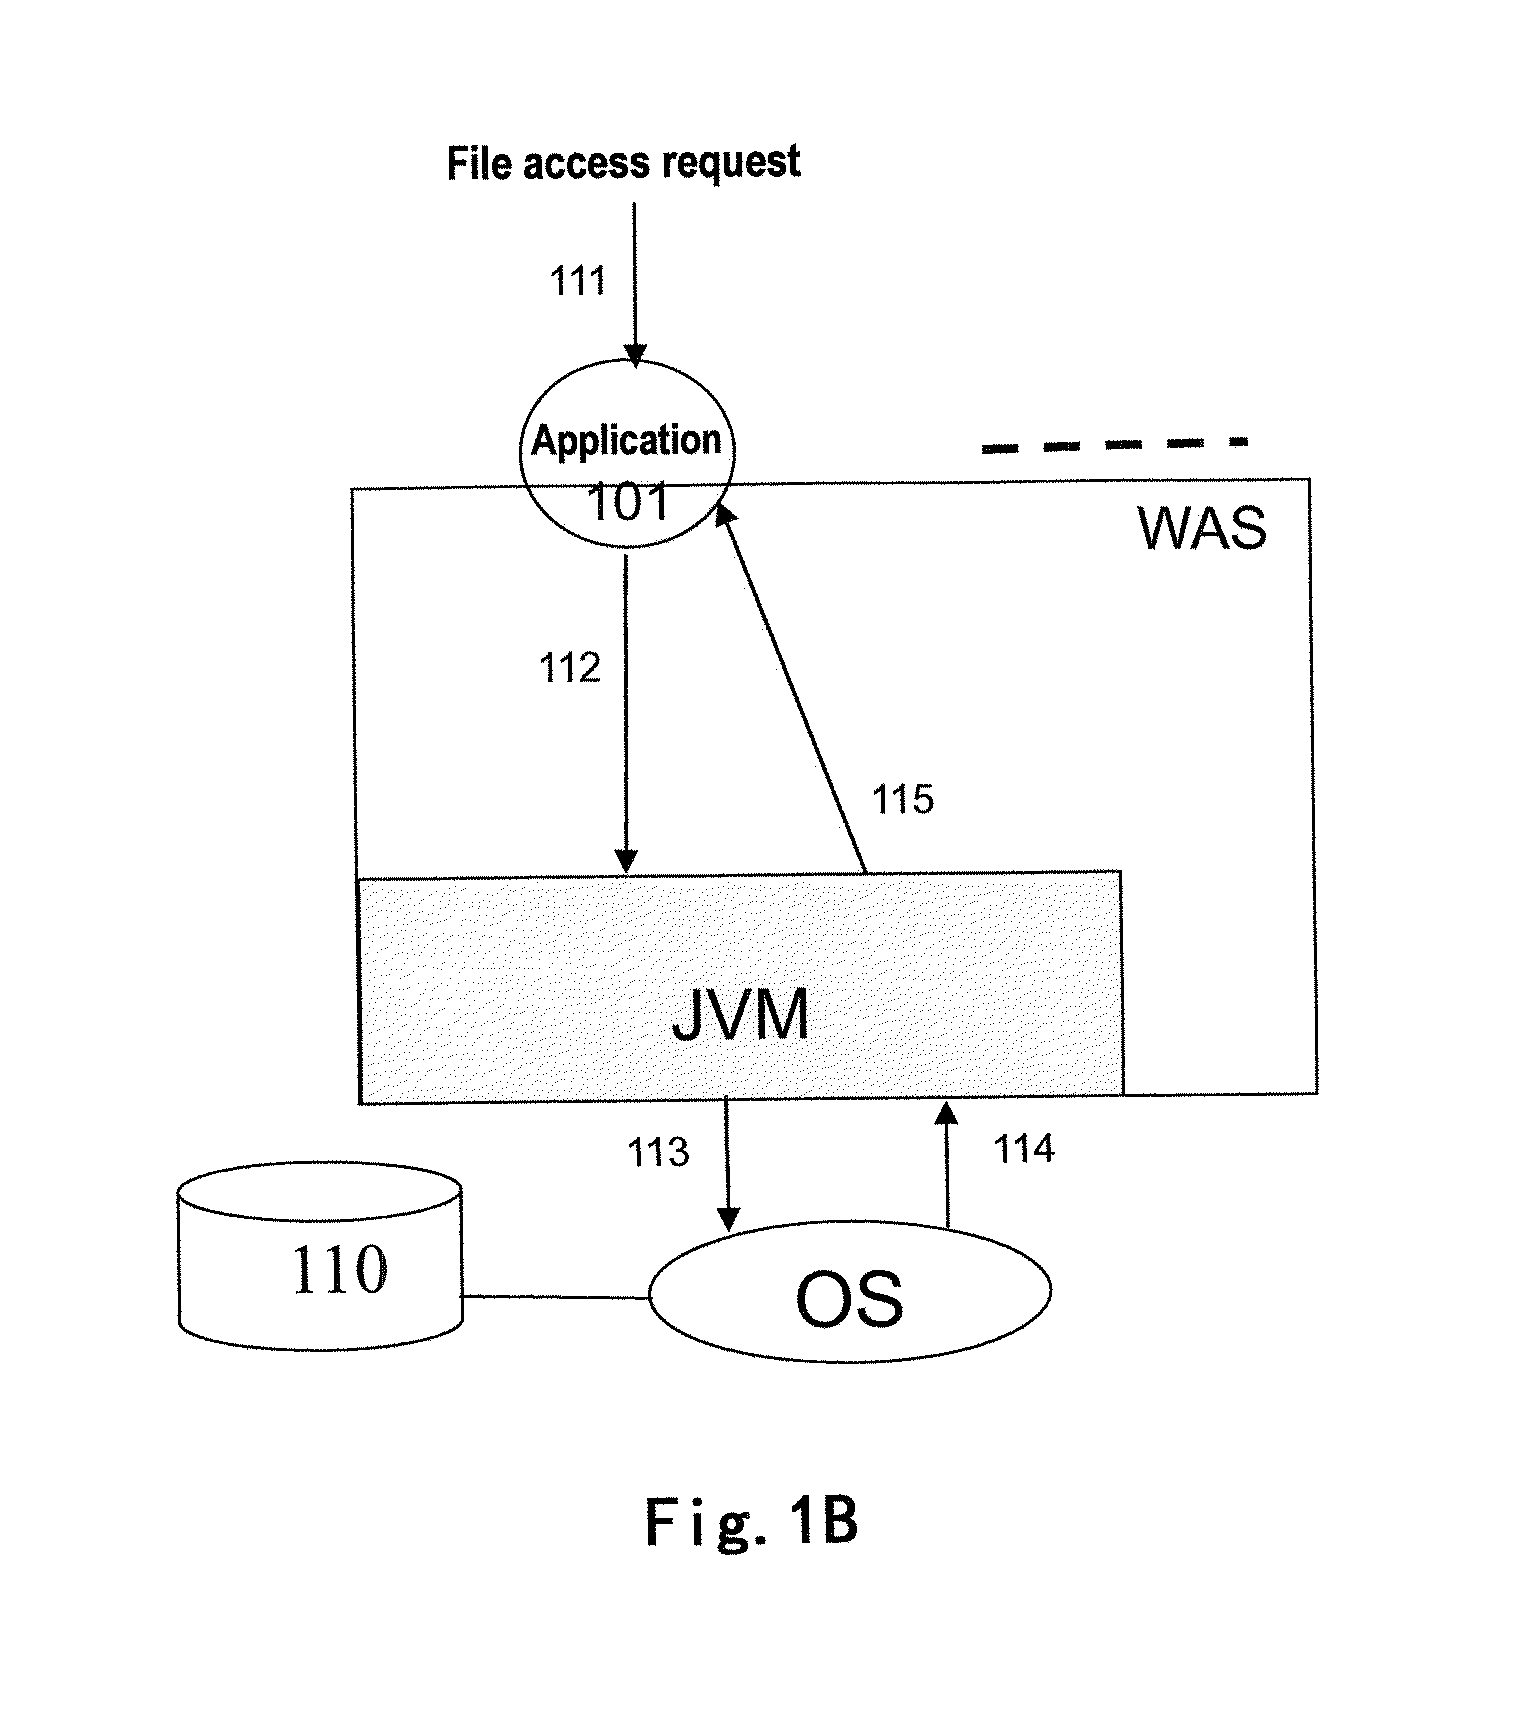 Mechanism and apparatus for transparently enables multi-tenant file access operation